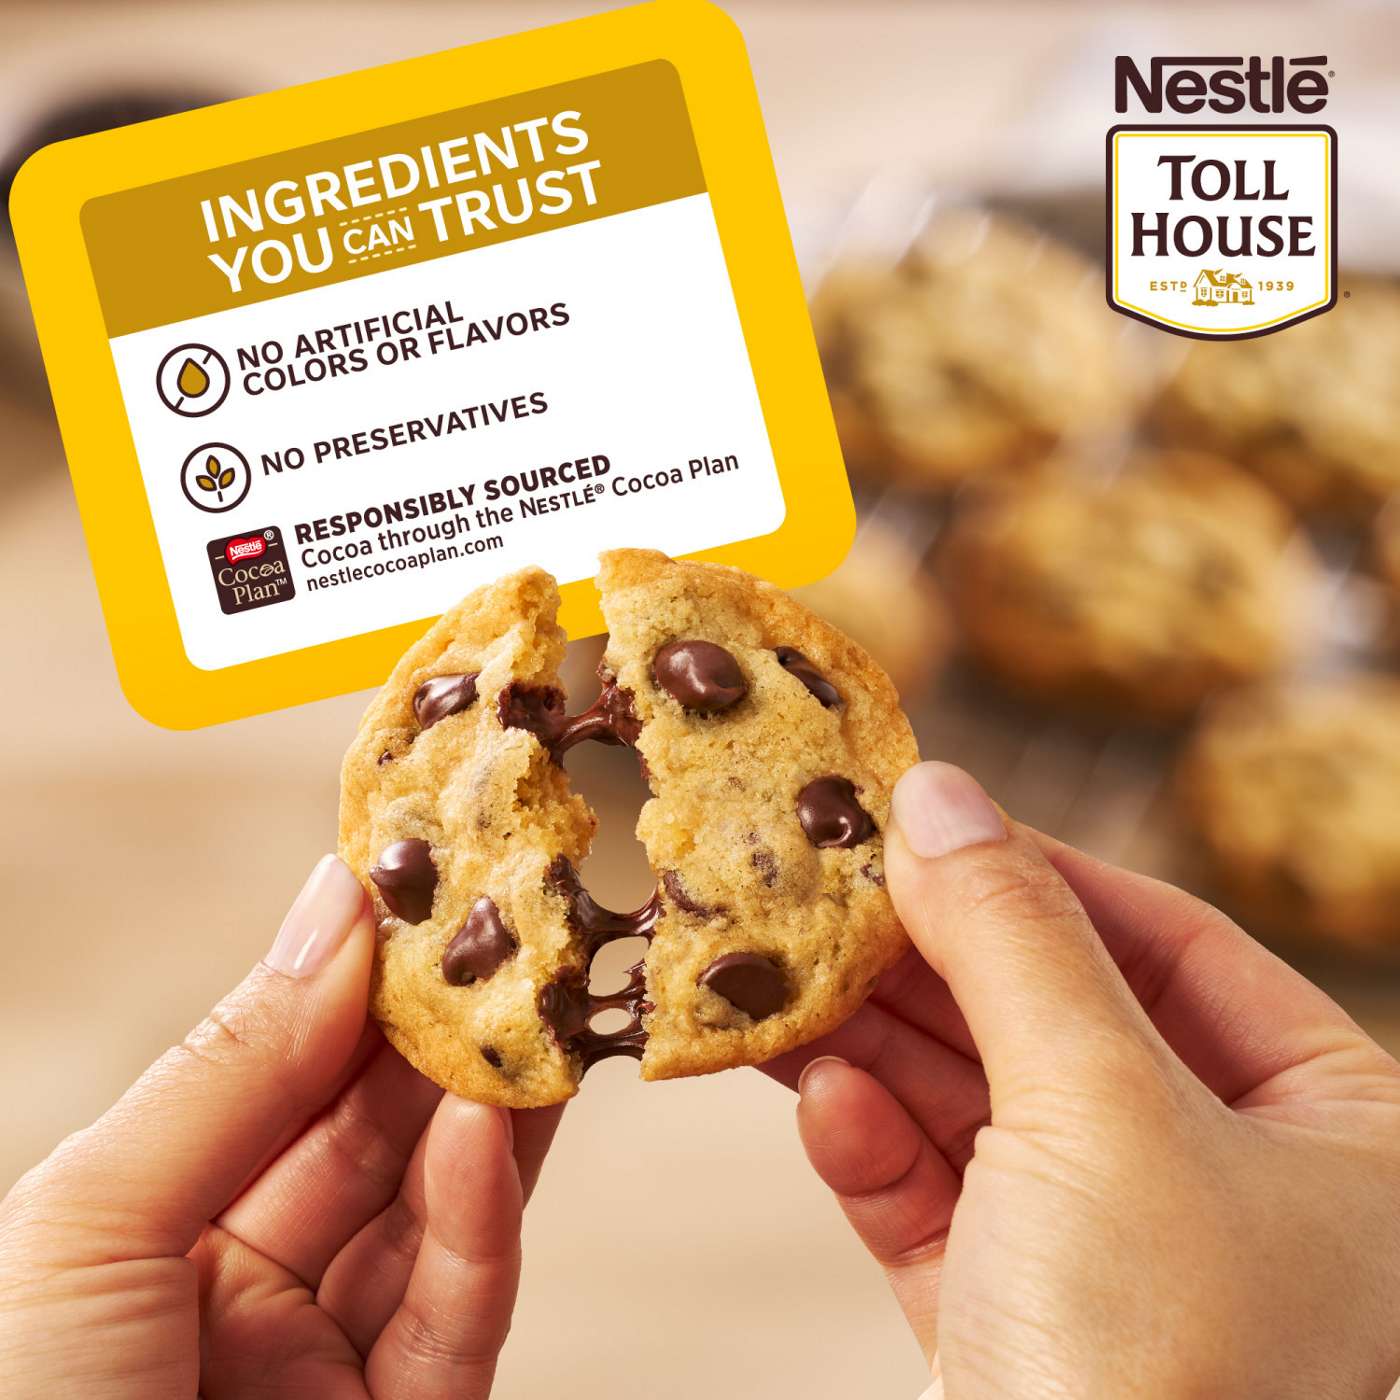 Nestle Toll House Chocolate Chip Cookie Dough, Cookies